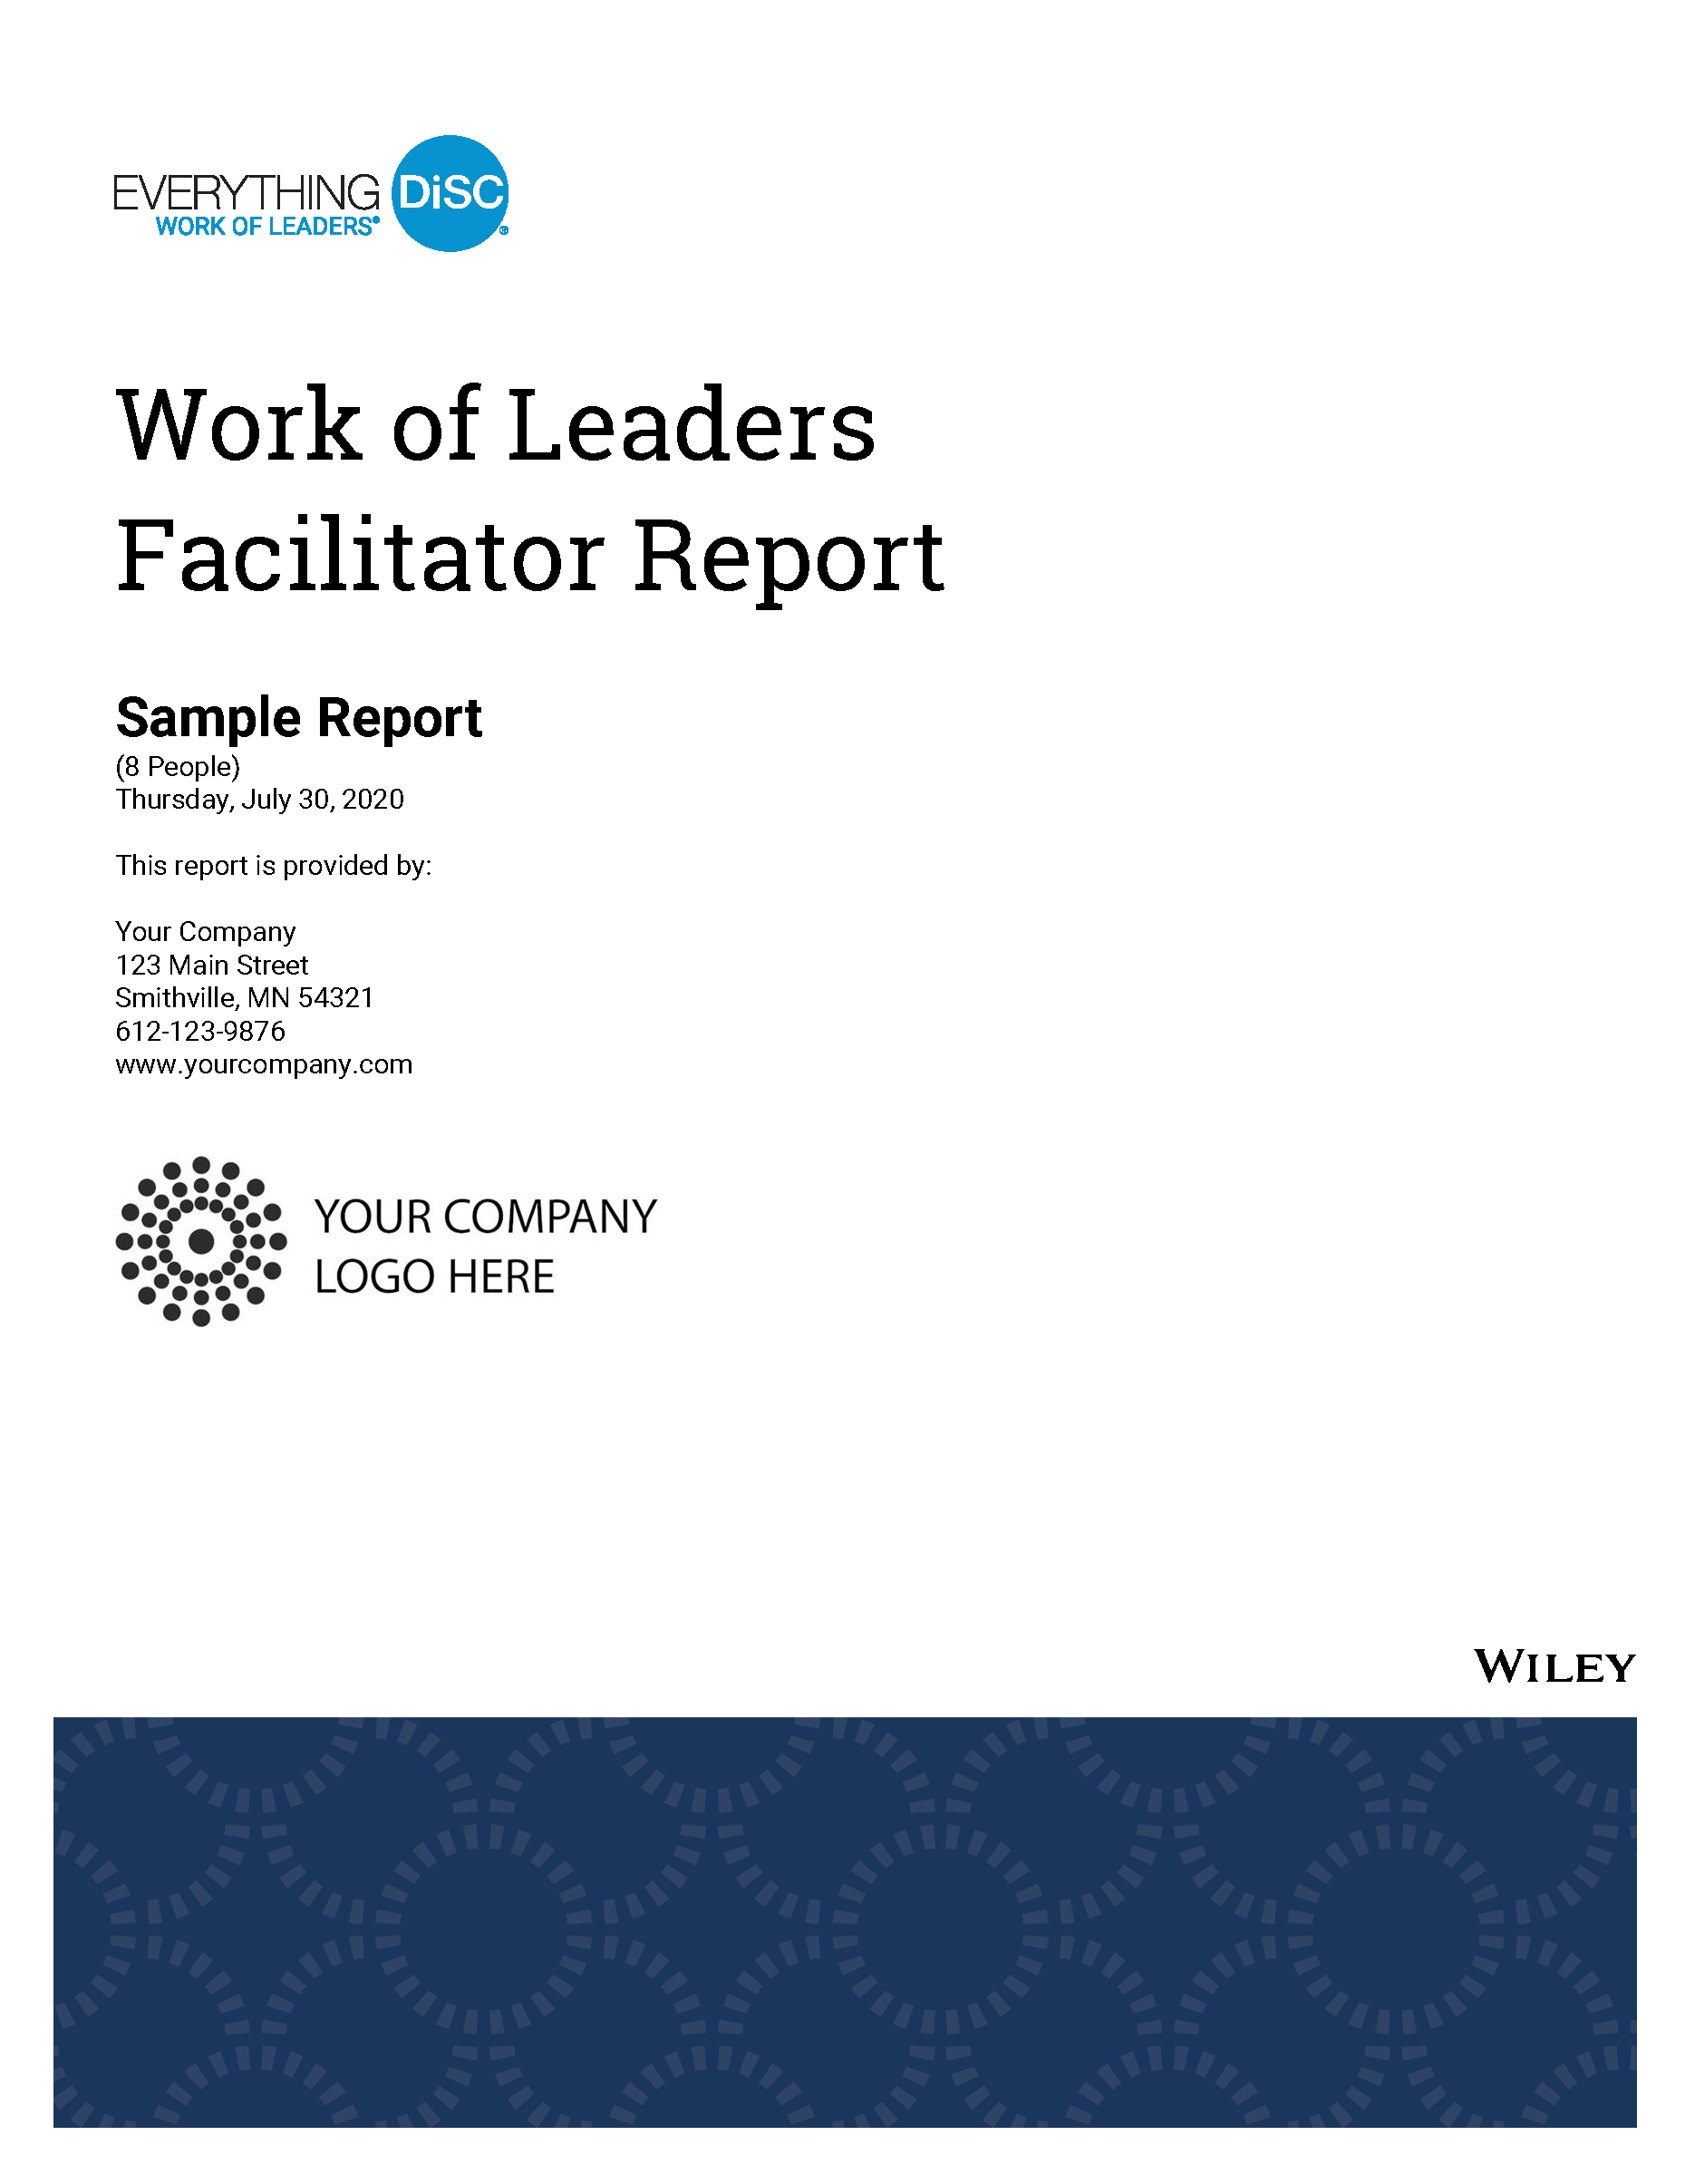 Everything DiSC Work of Leaders Facilitator Report Image 2020